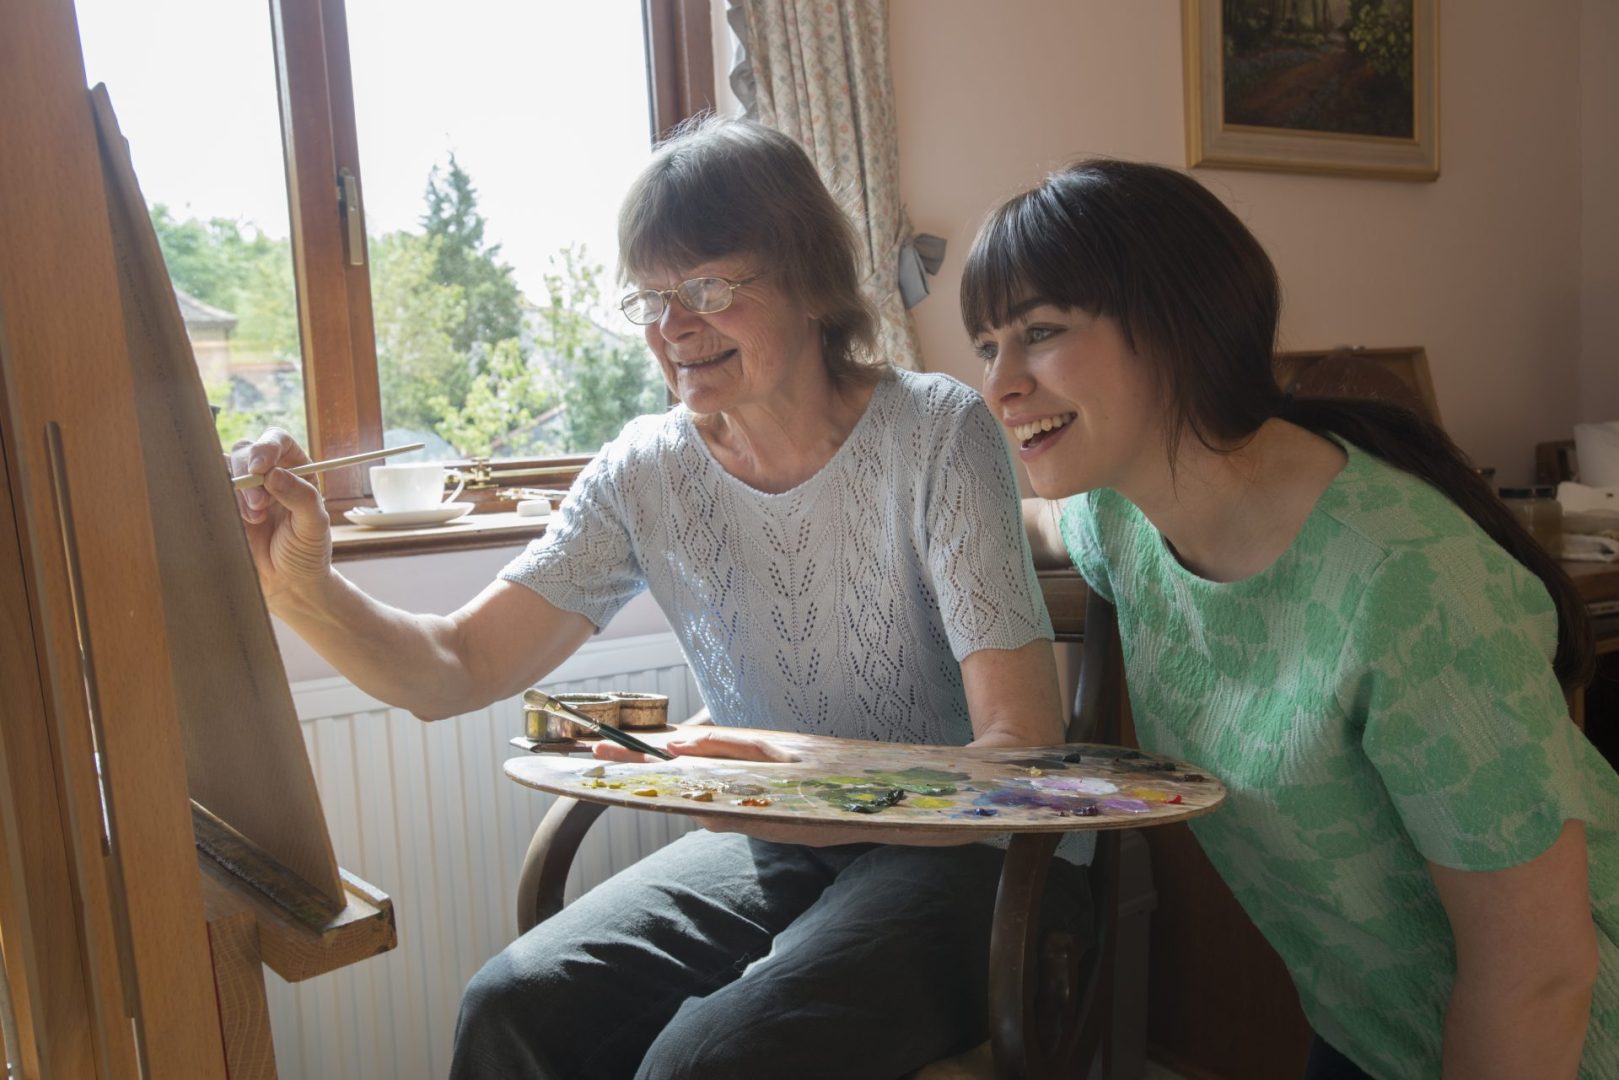 Women painting with the help of in-care help